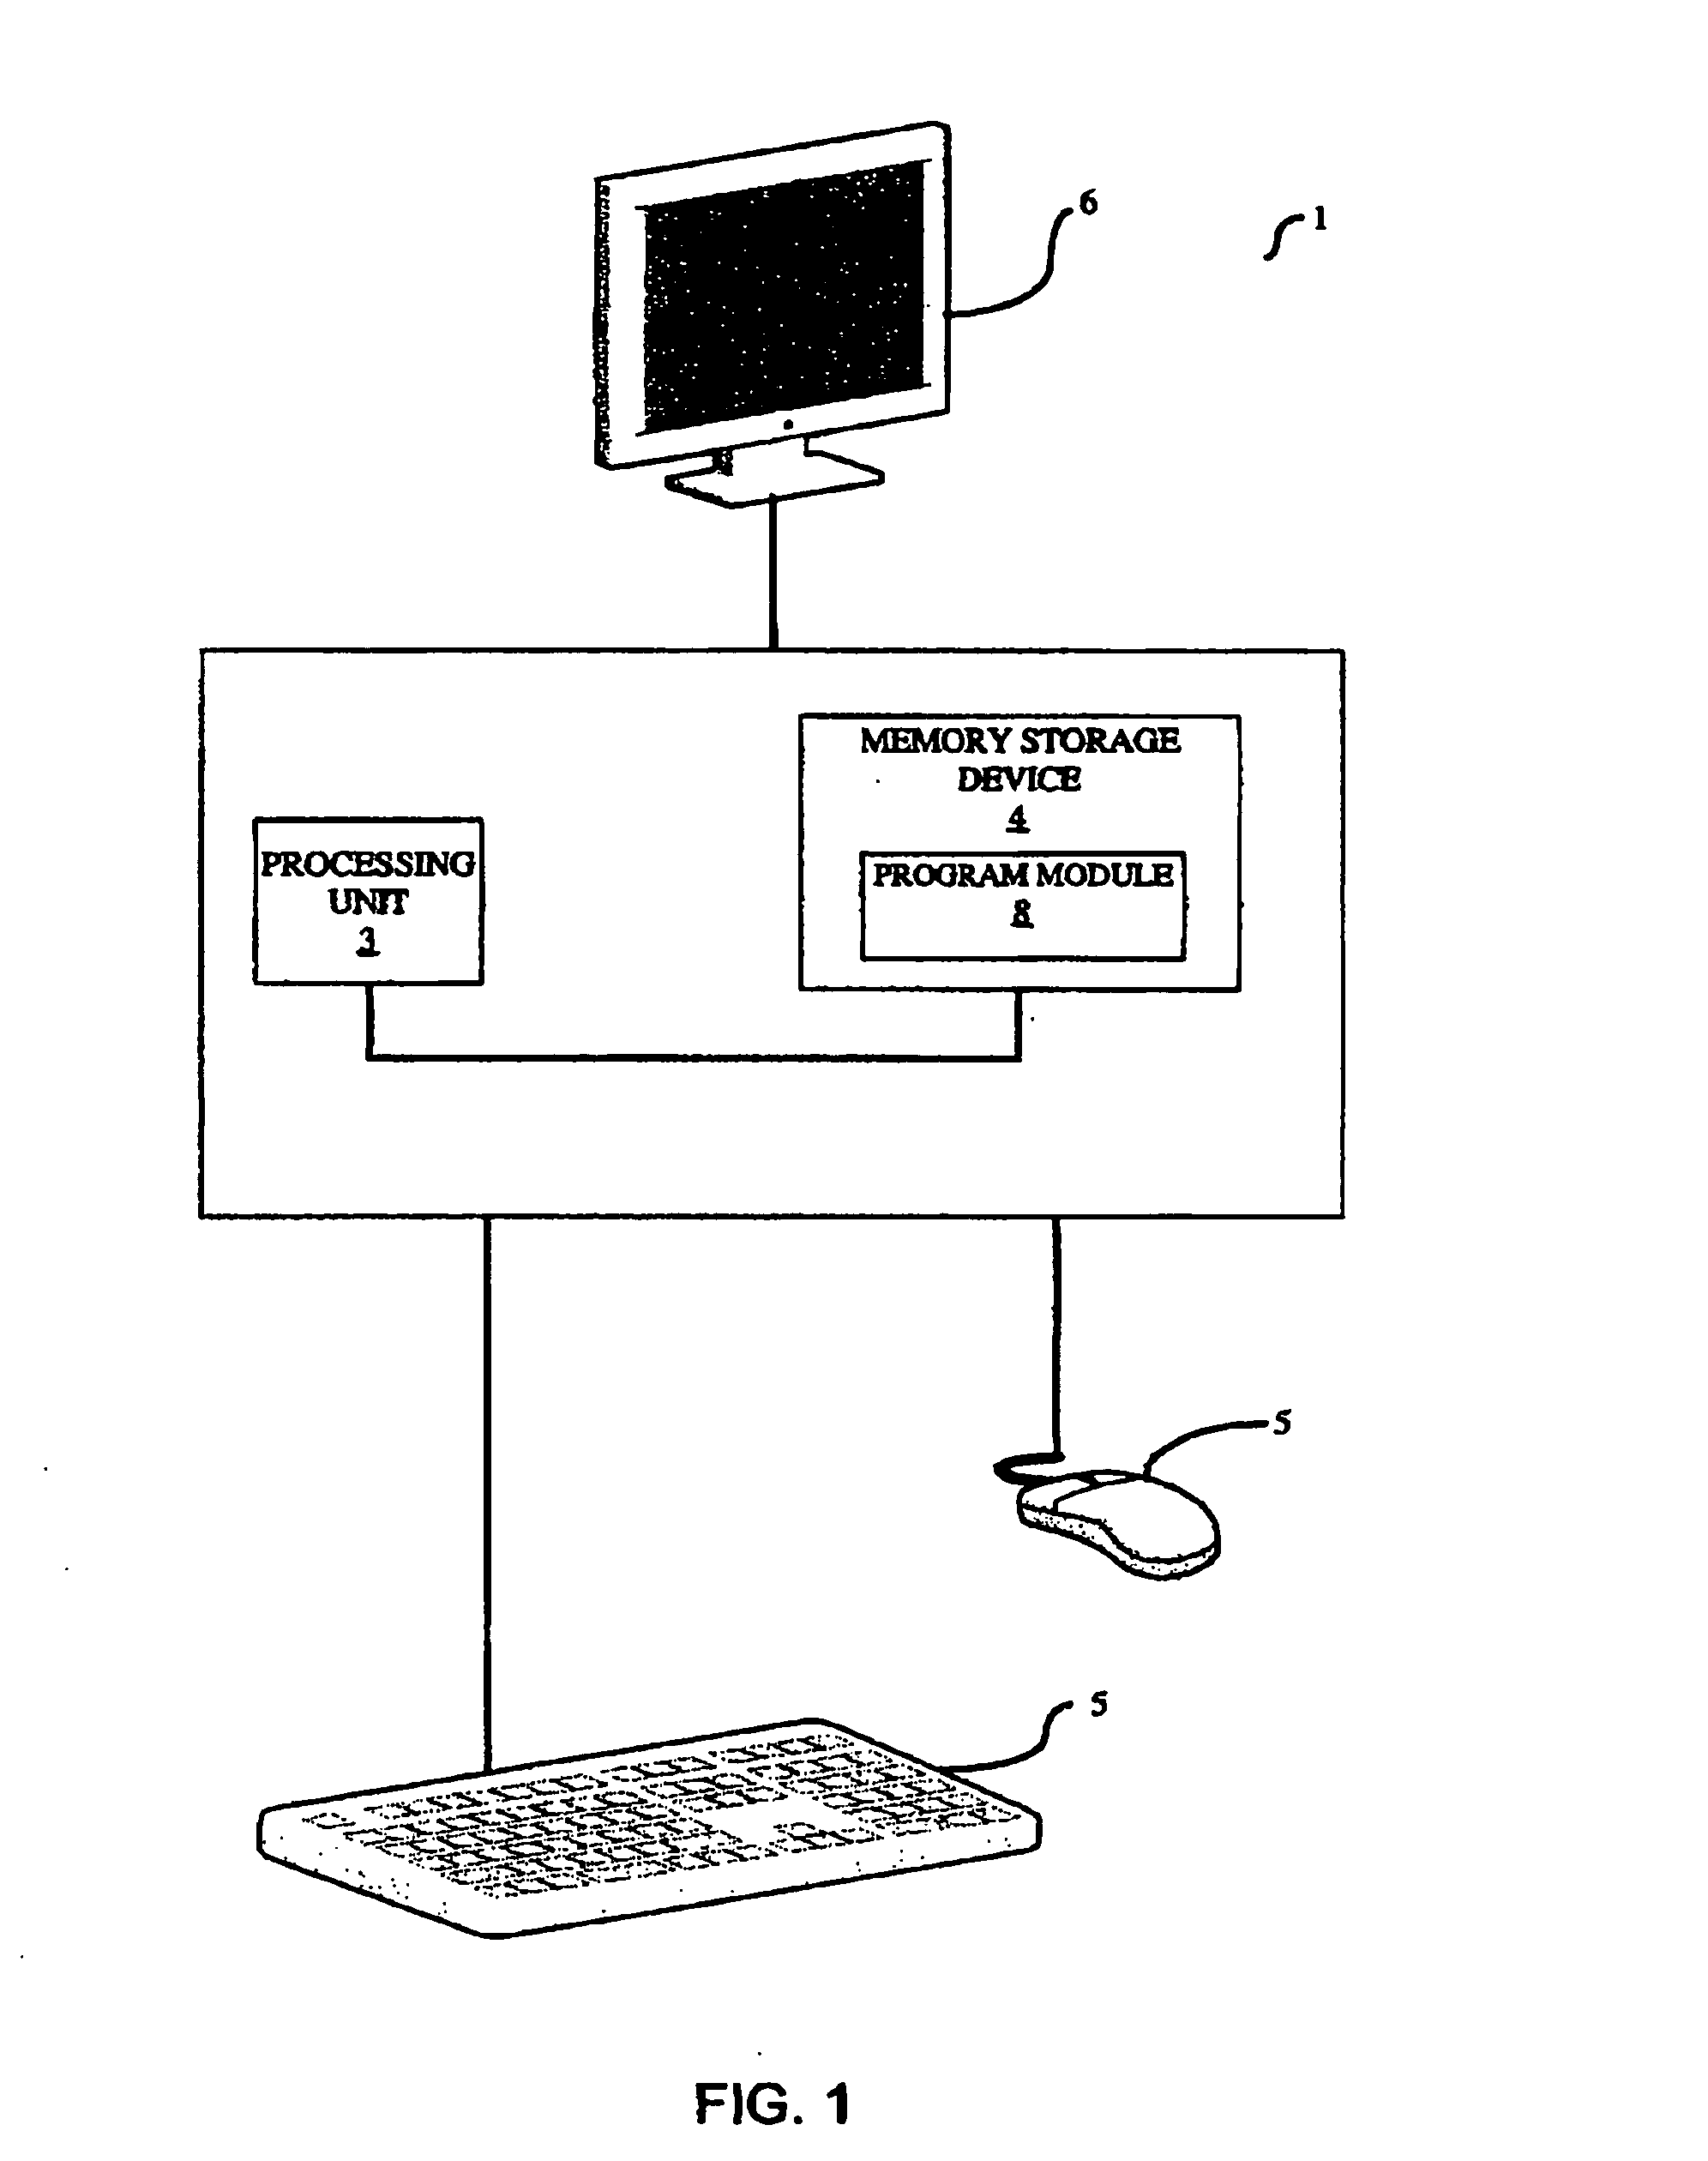 Method and apparatus for concept-based visual